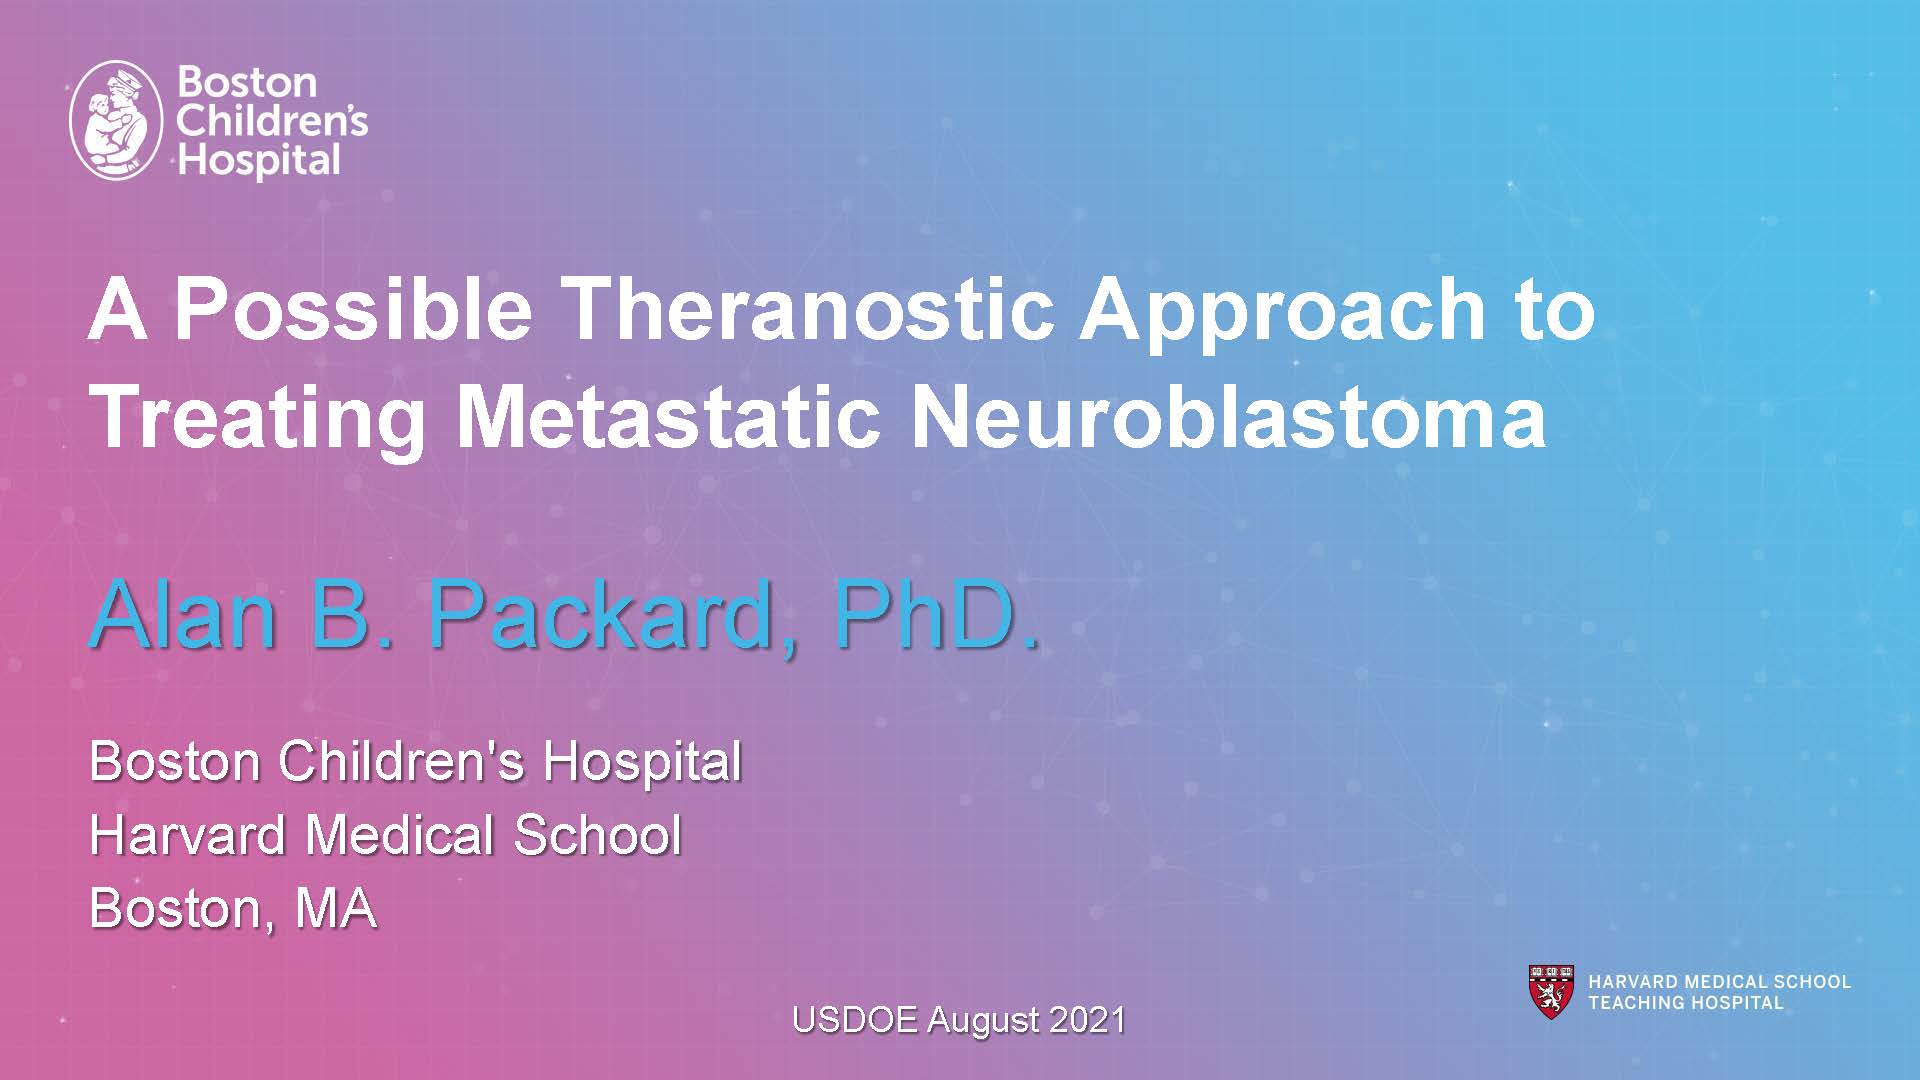 A Possible Theranostic Approach to Treating Metastatic Neuroblastoma by Dr. Alan Packard, Boston Children's Hospital